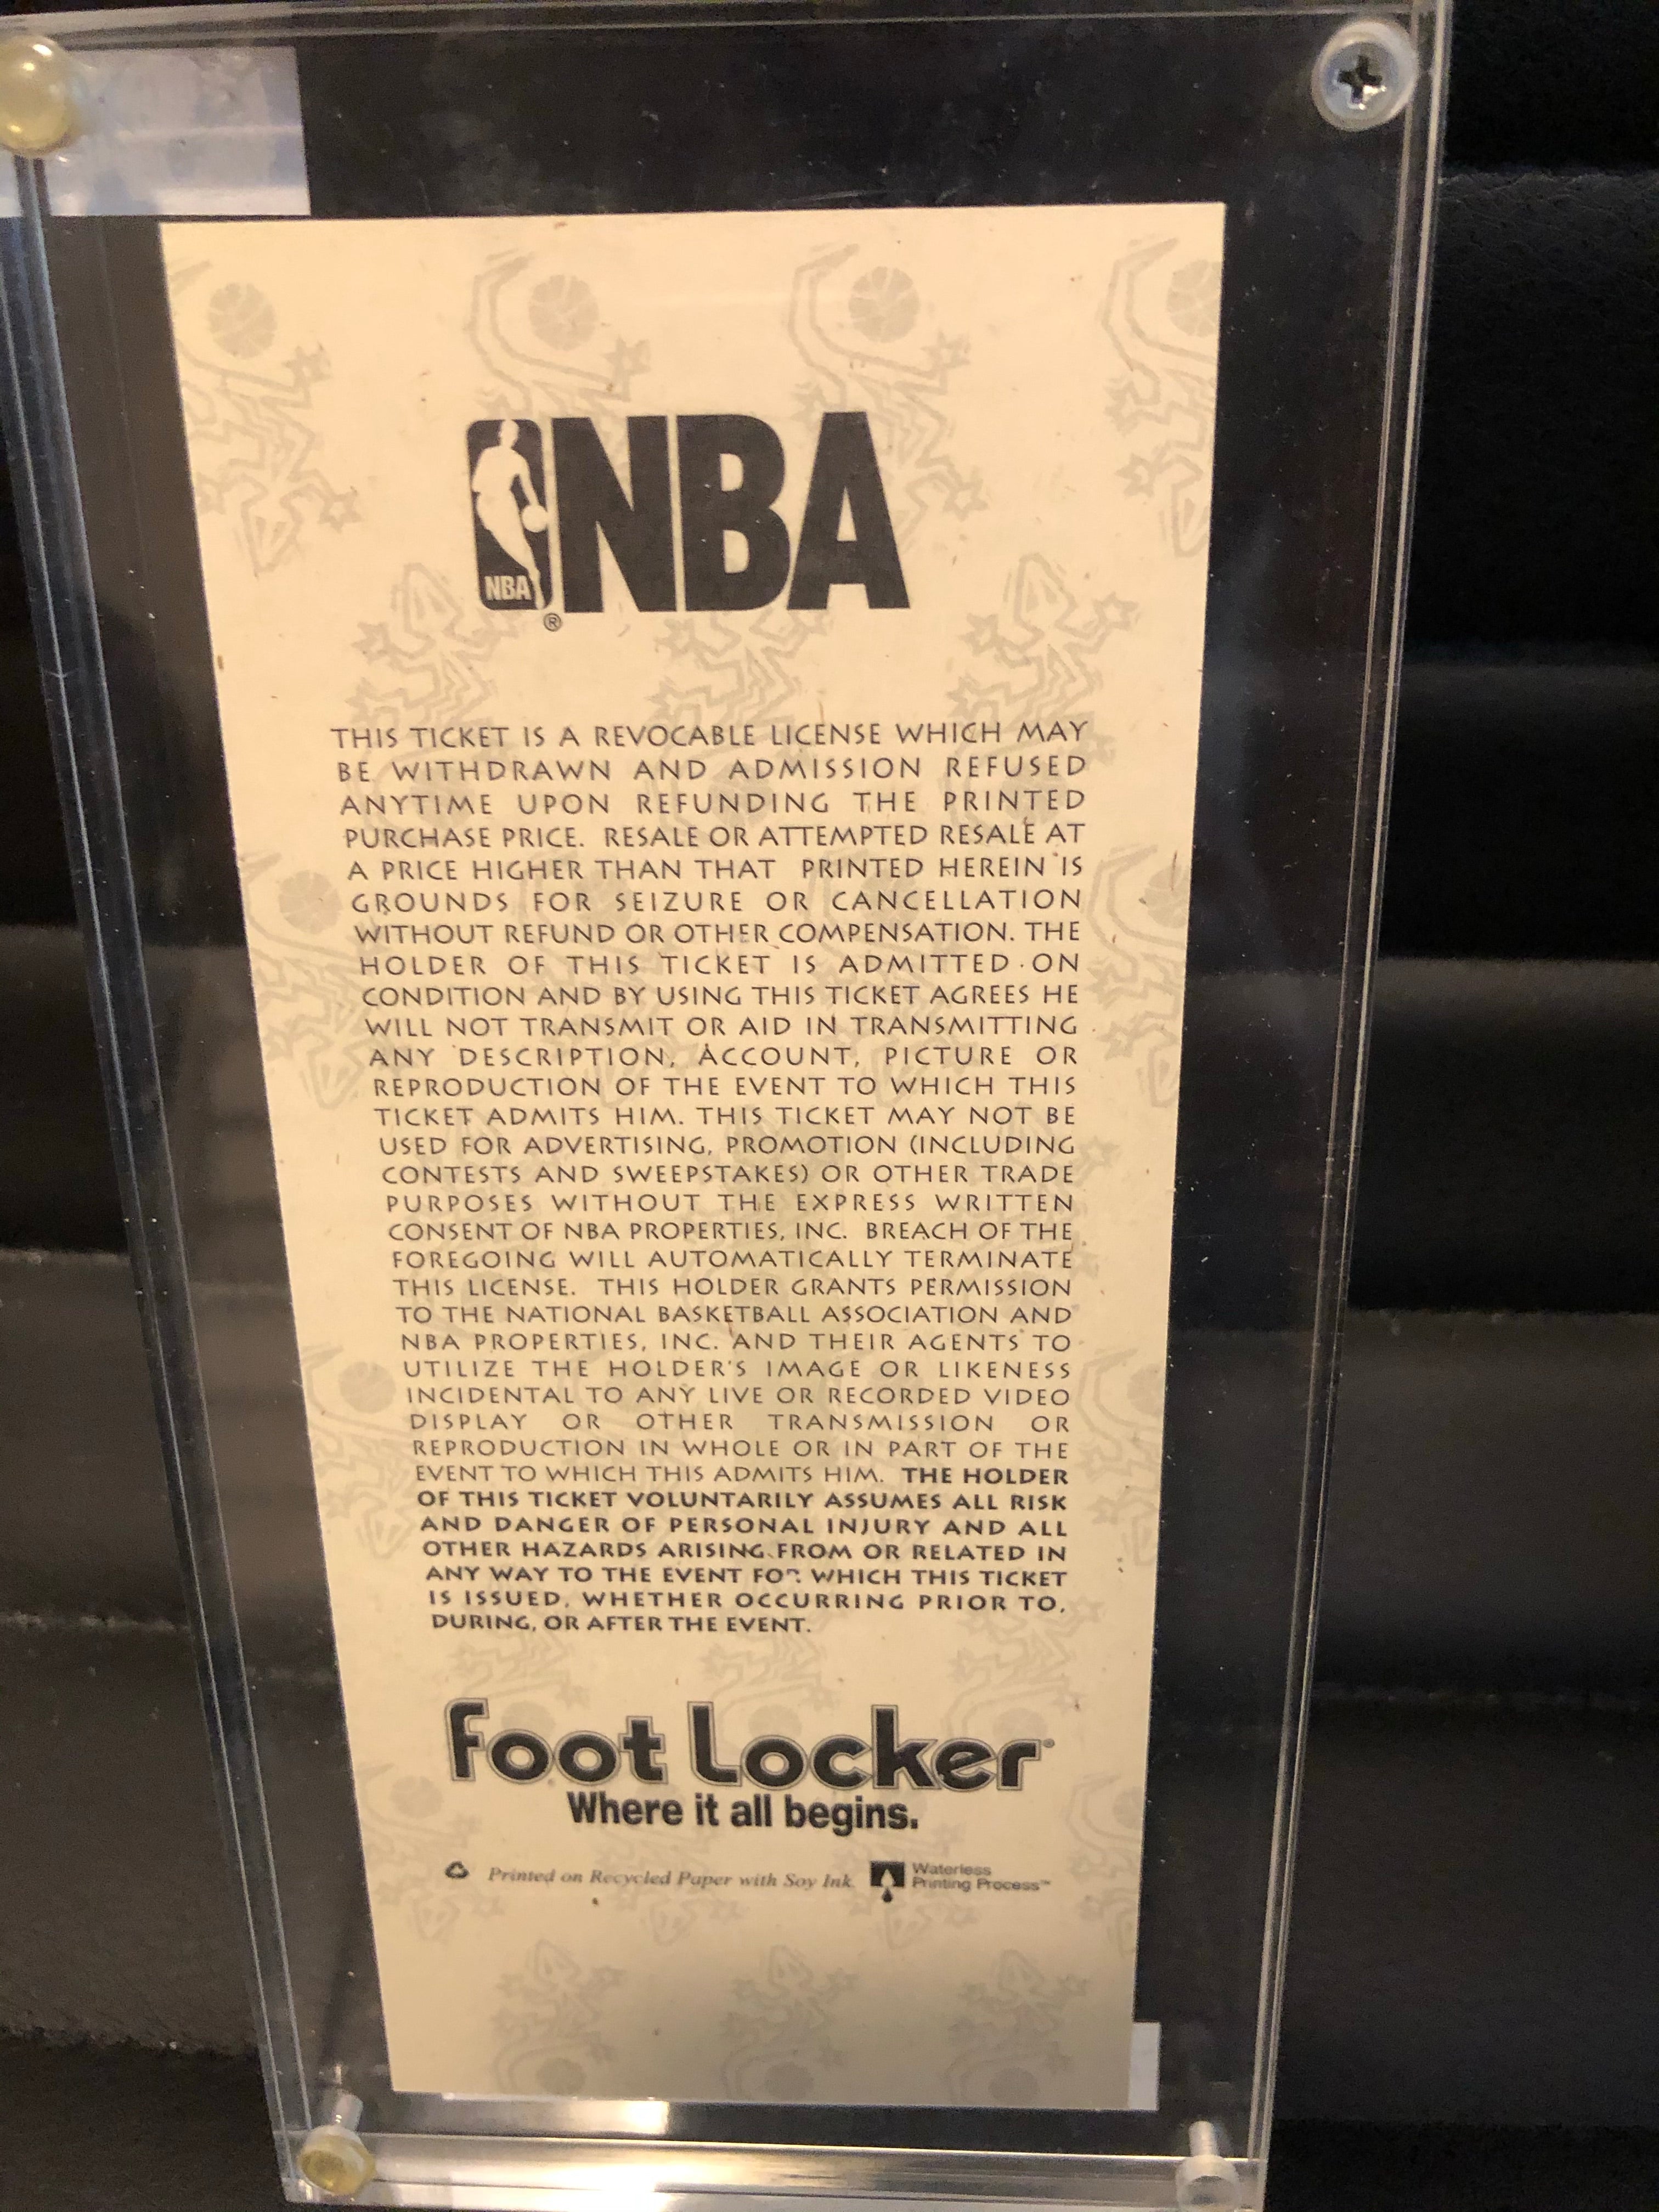 1995 NBA All Star game ticket in lucite holder